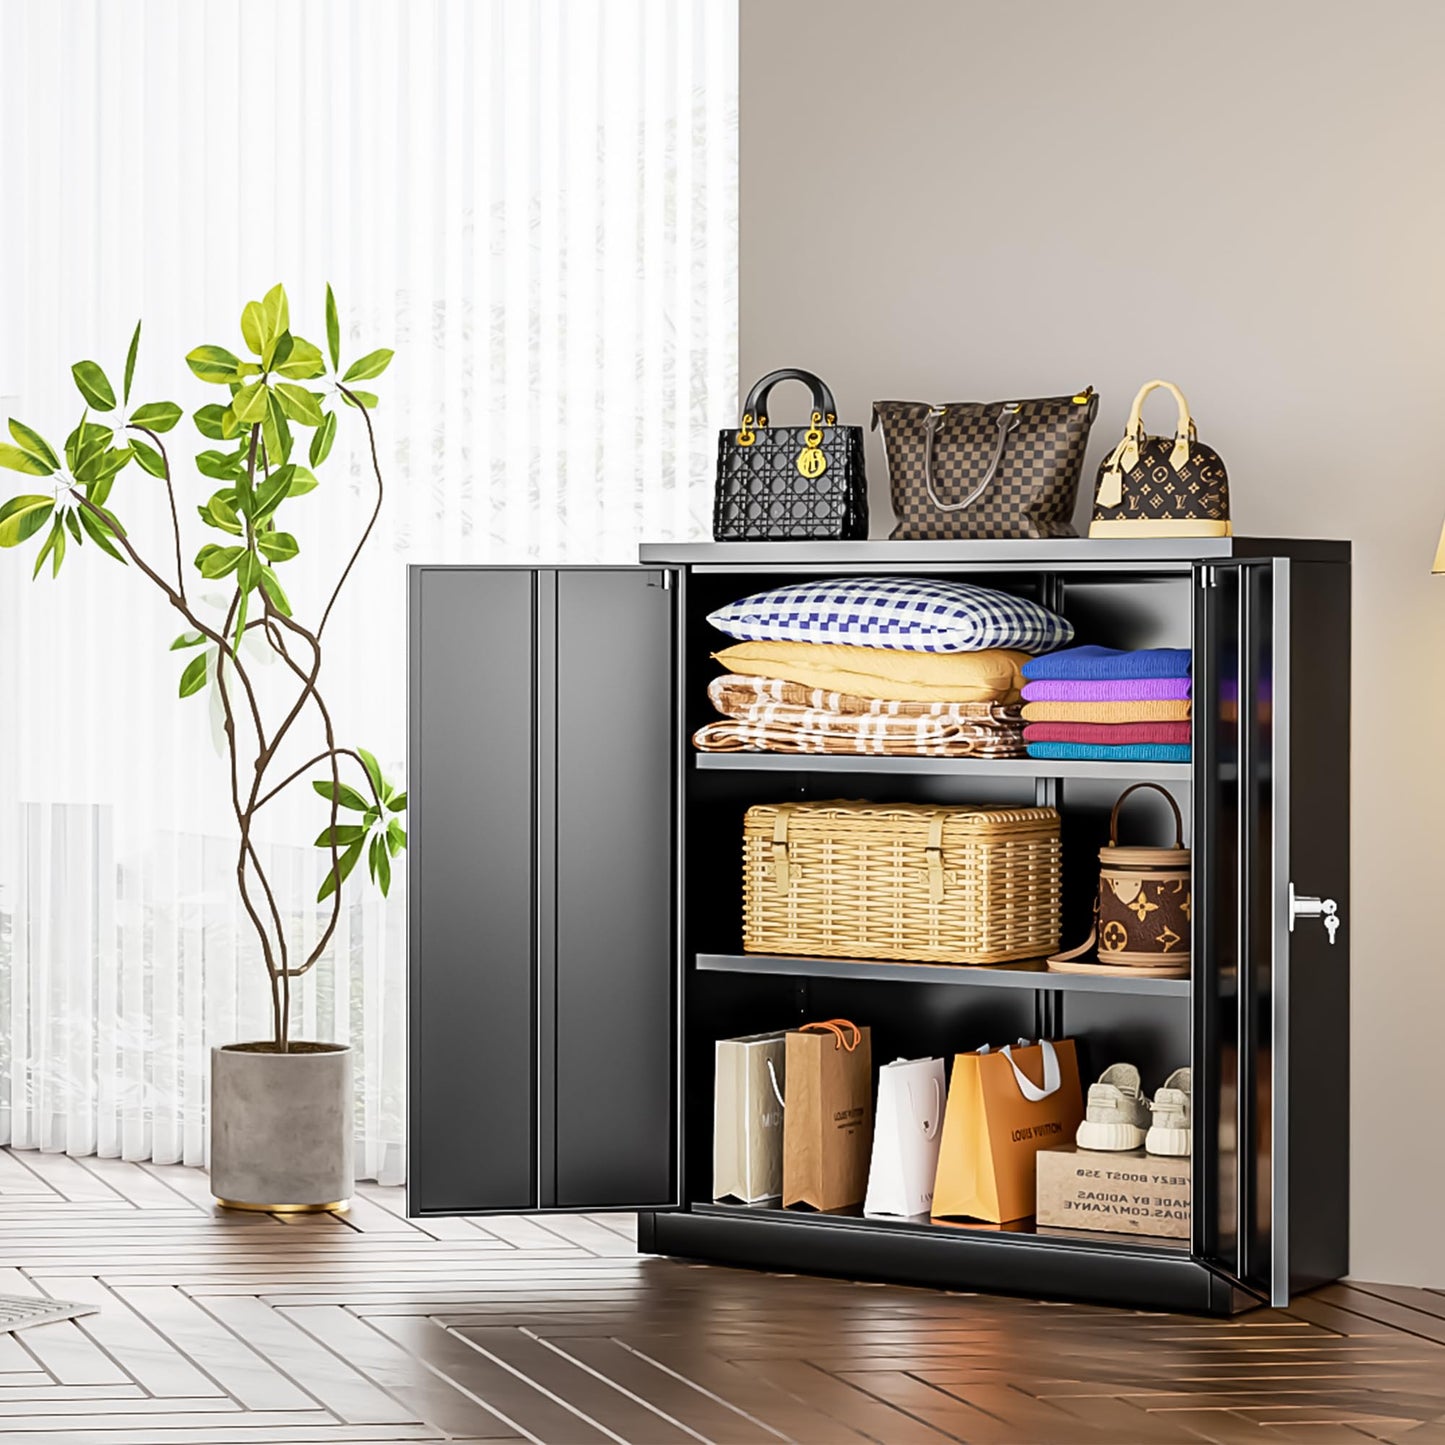 INTERGREAT Metal Storage Cabinet with 2 Drawers, 42” Black Steel Garage Storage Cabinet with 2 Doors and Adjustable Shelves, Office Storage Cabinet with Lock for School, Home